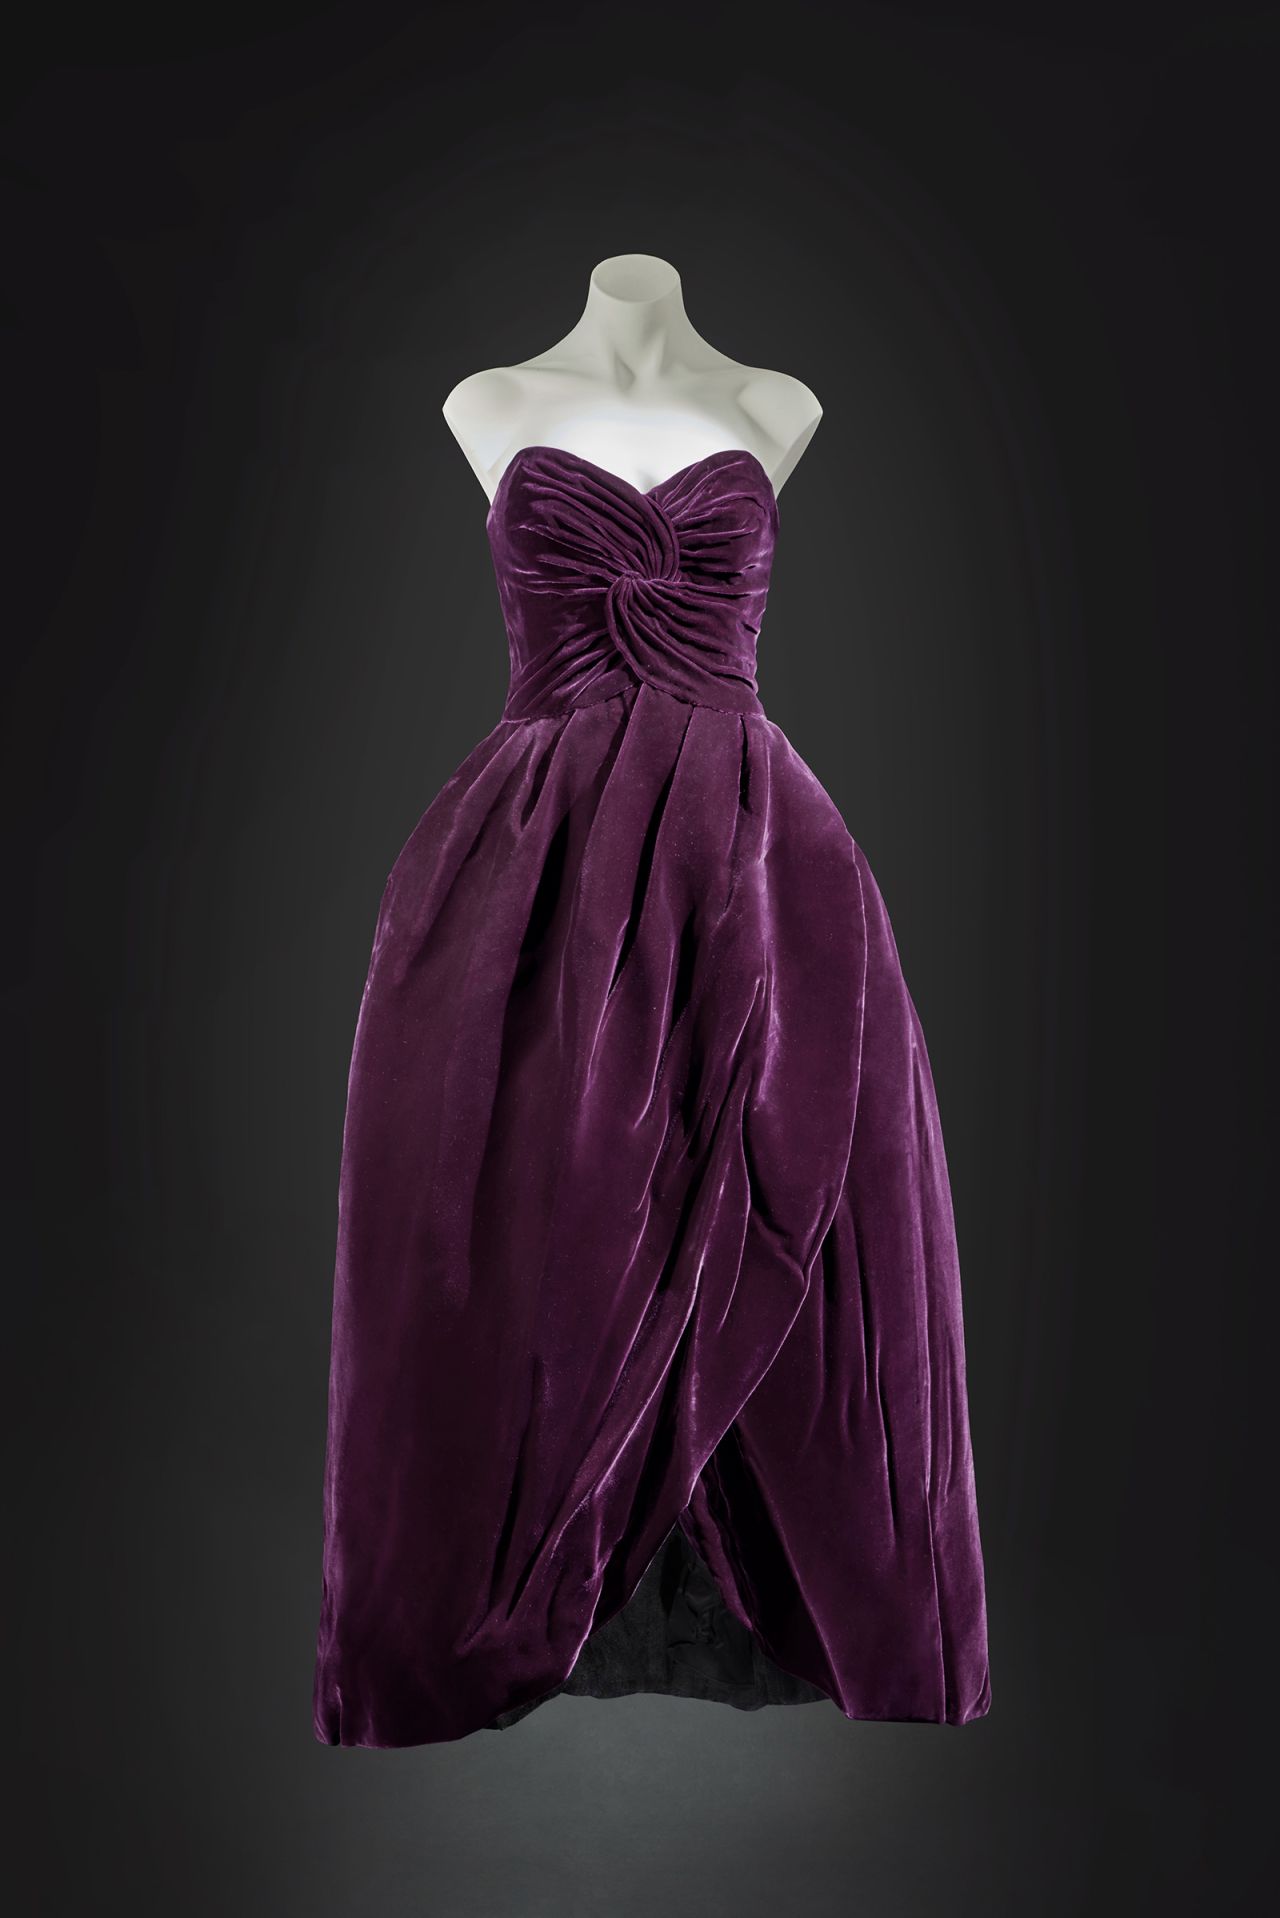 Princess Diana's aubergine velvet ballgown was up for sale for the first time in 25 years.